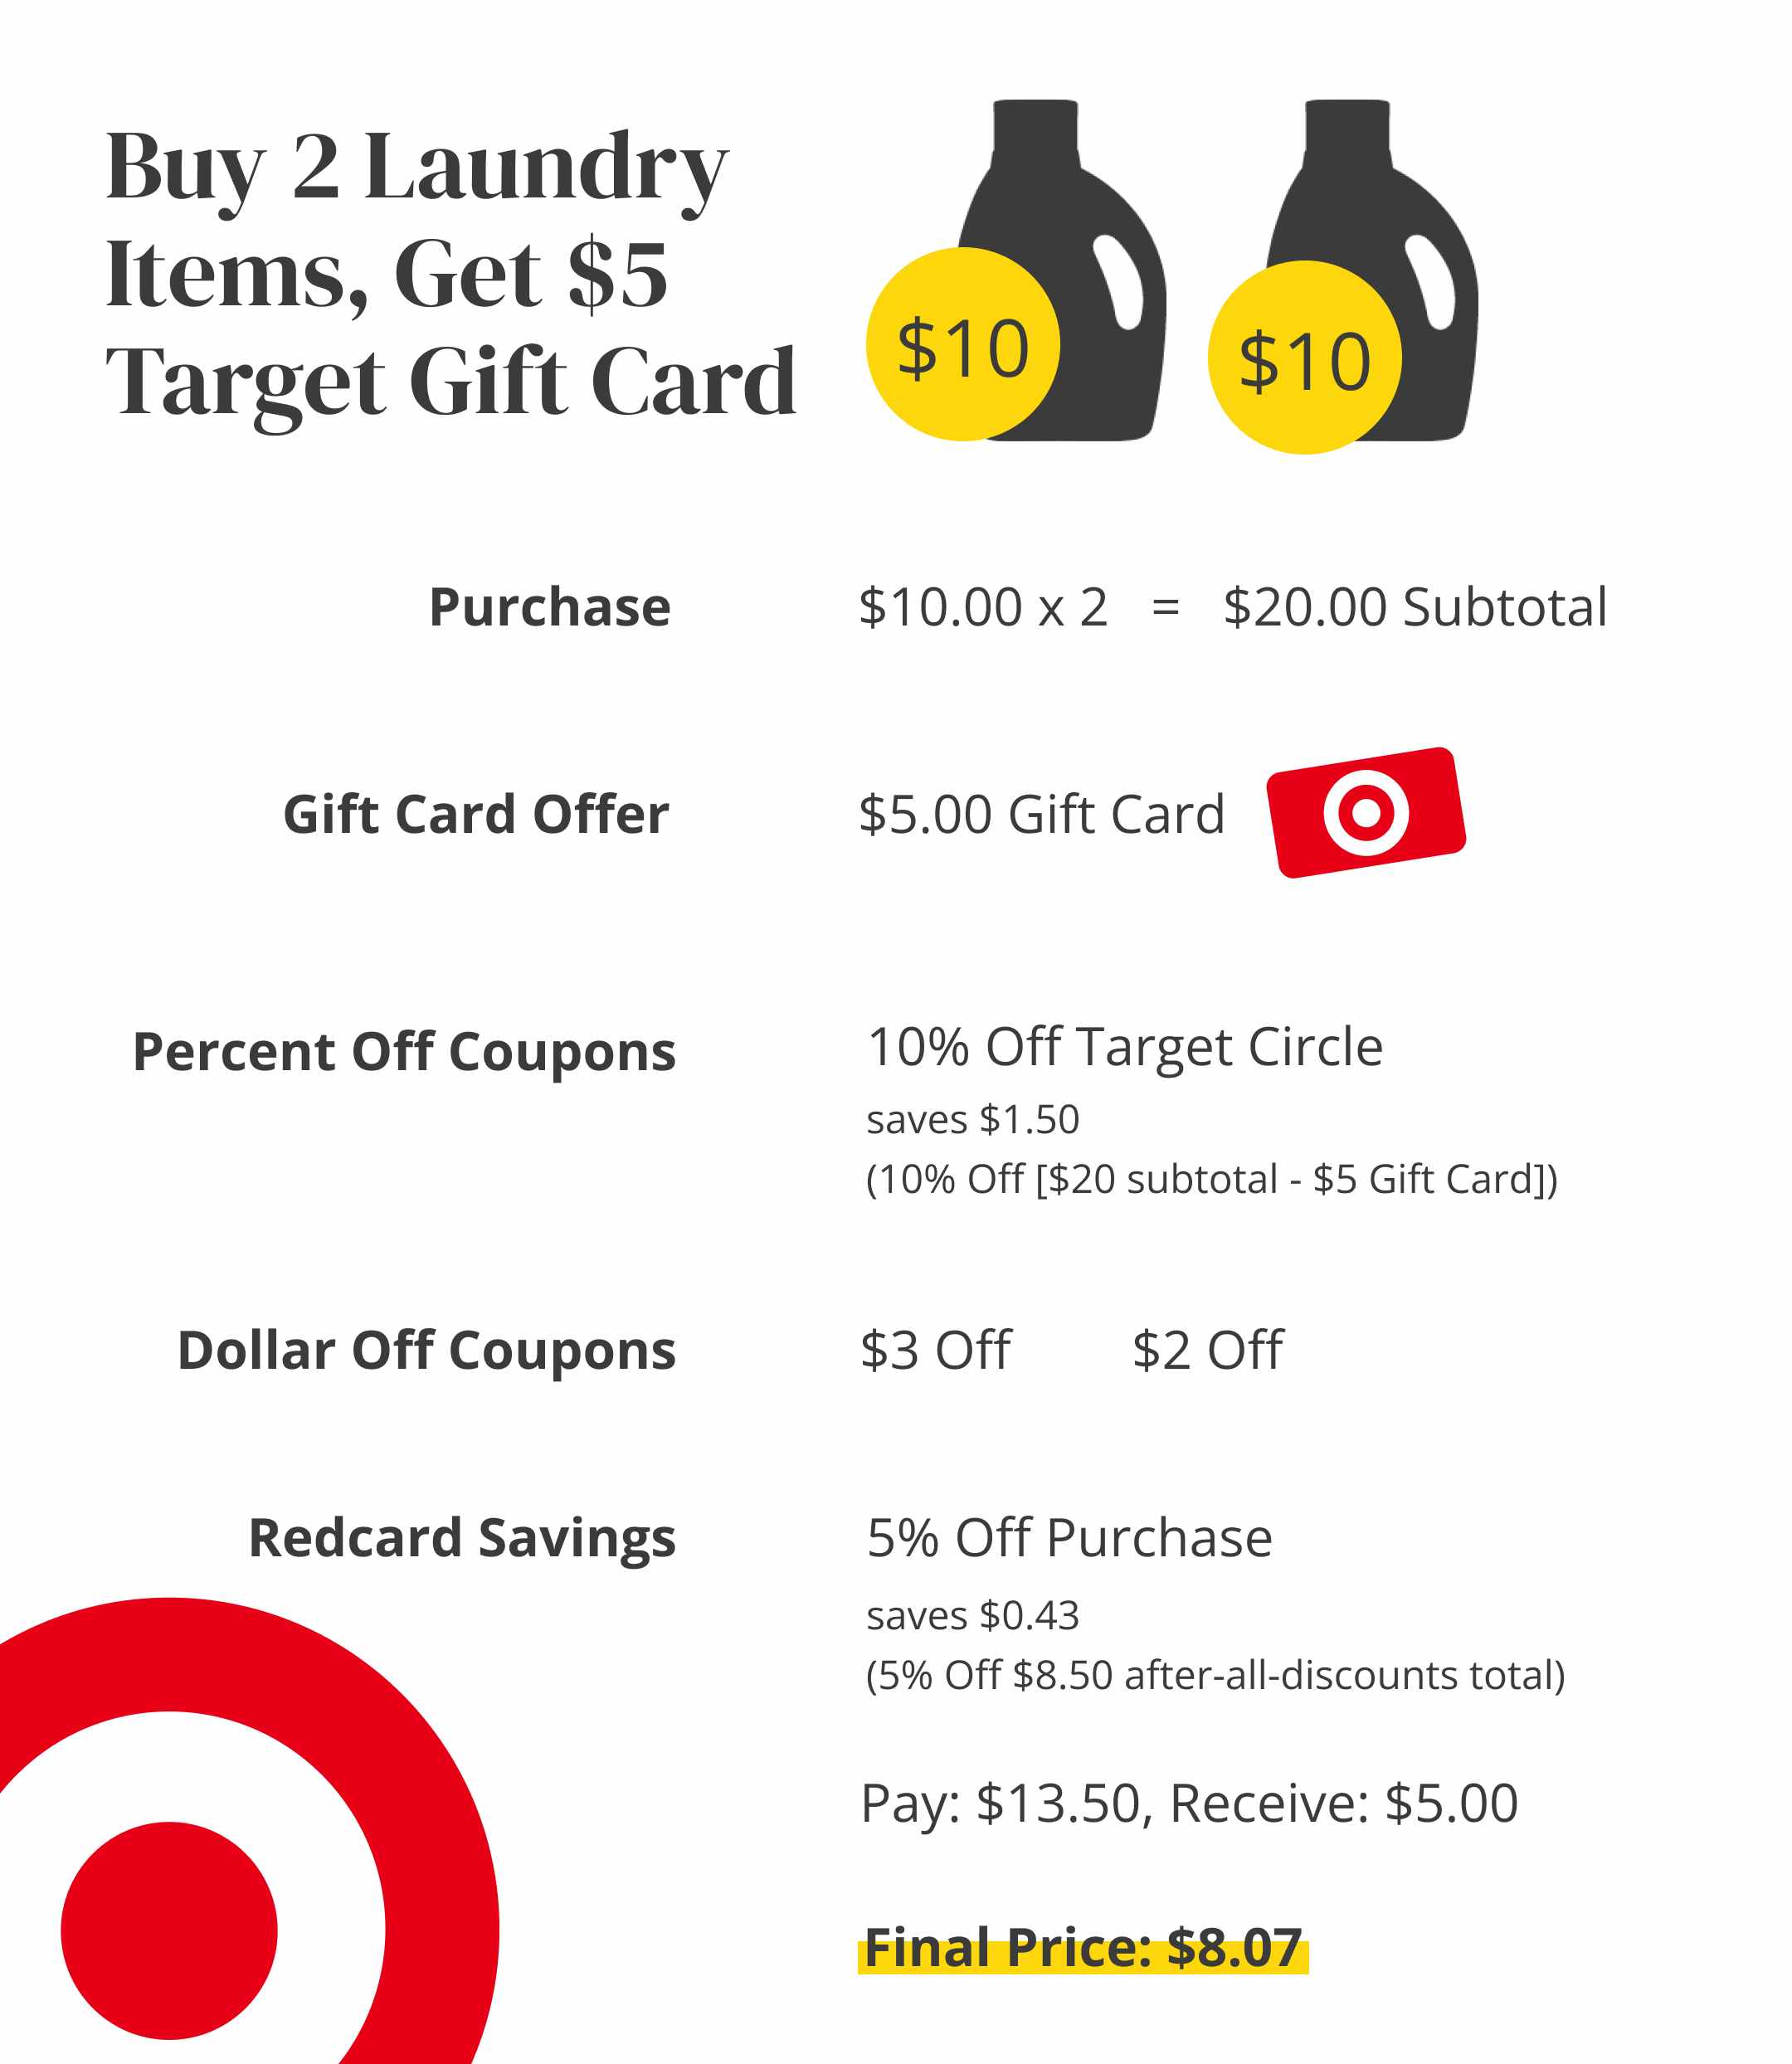 A graphic showing the order in which Target applies multiple coupons to your order: gift card promo savings are first, then Circle offers, then manufacturer coupons